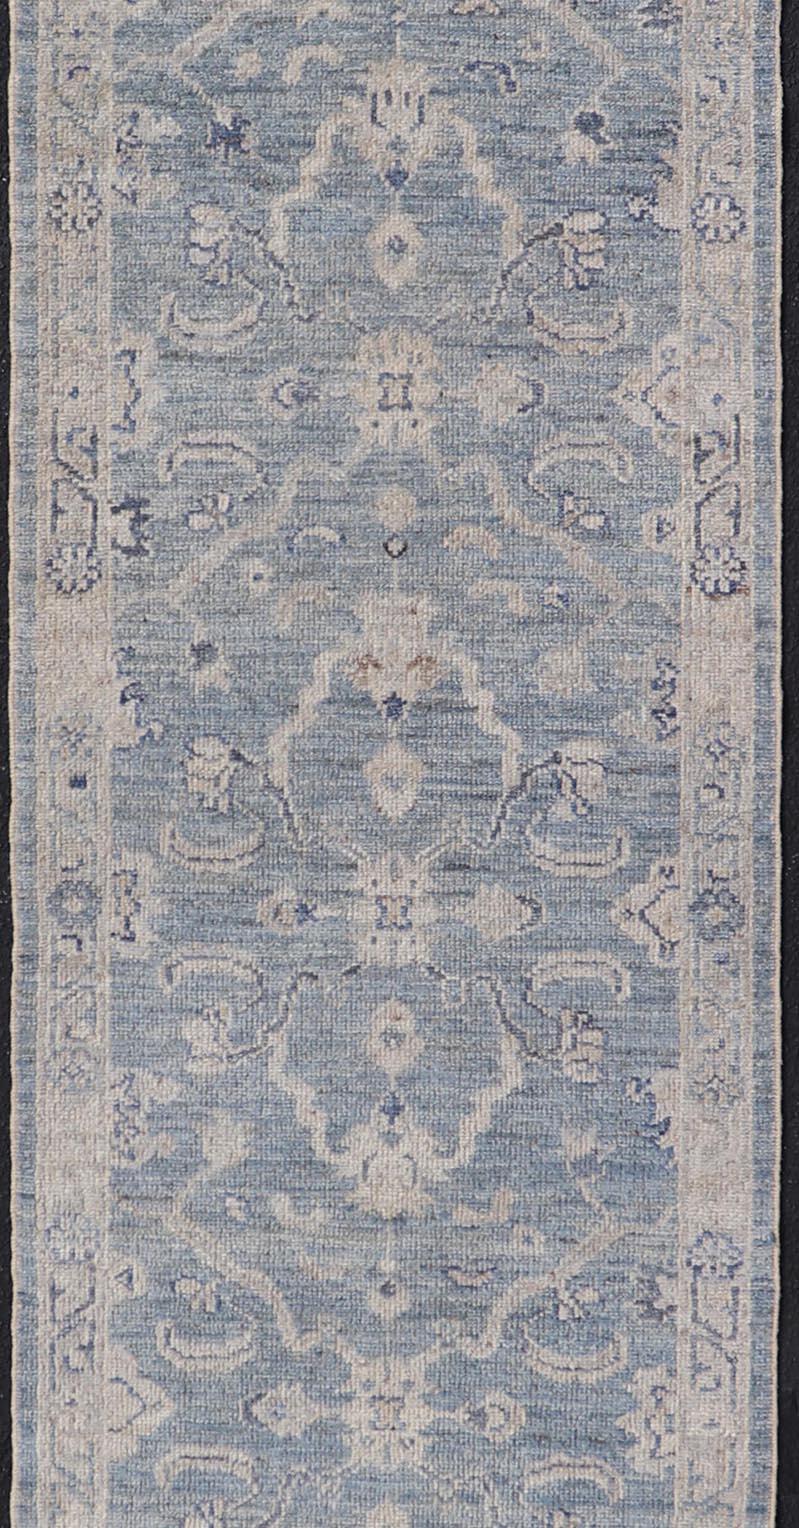 Angora Turkish Oushak Runner with Floral Design and Medium Blue and Grey Border In New Condition For Sale In Atlanta, GA